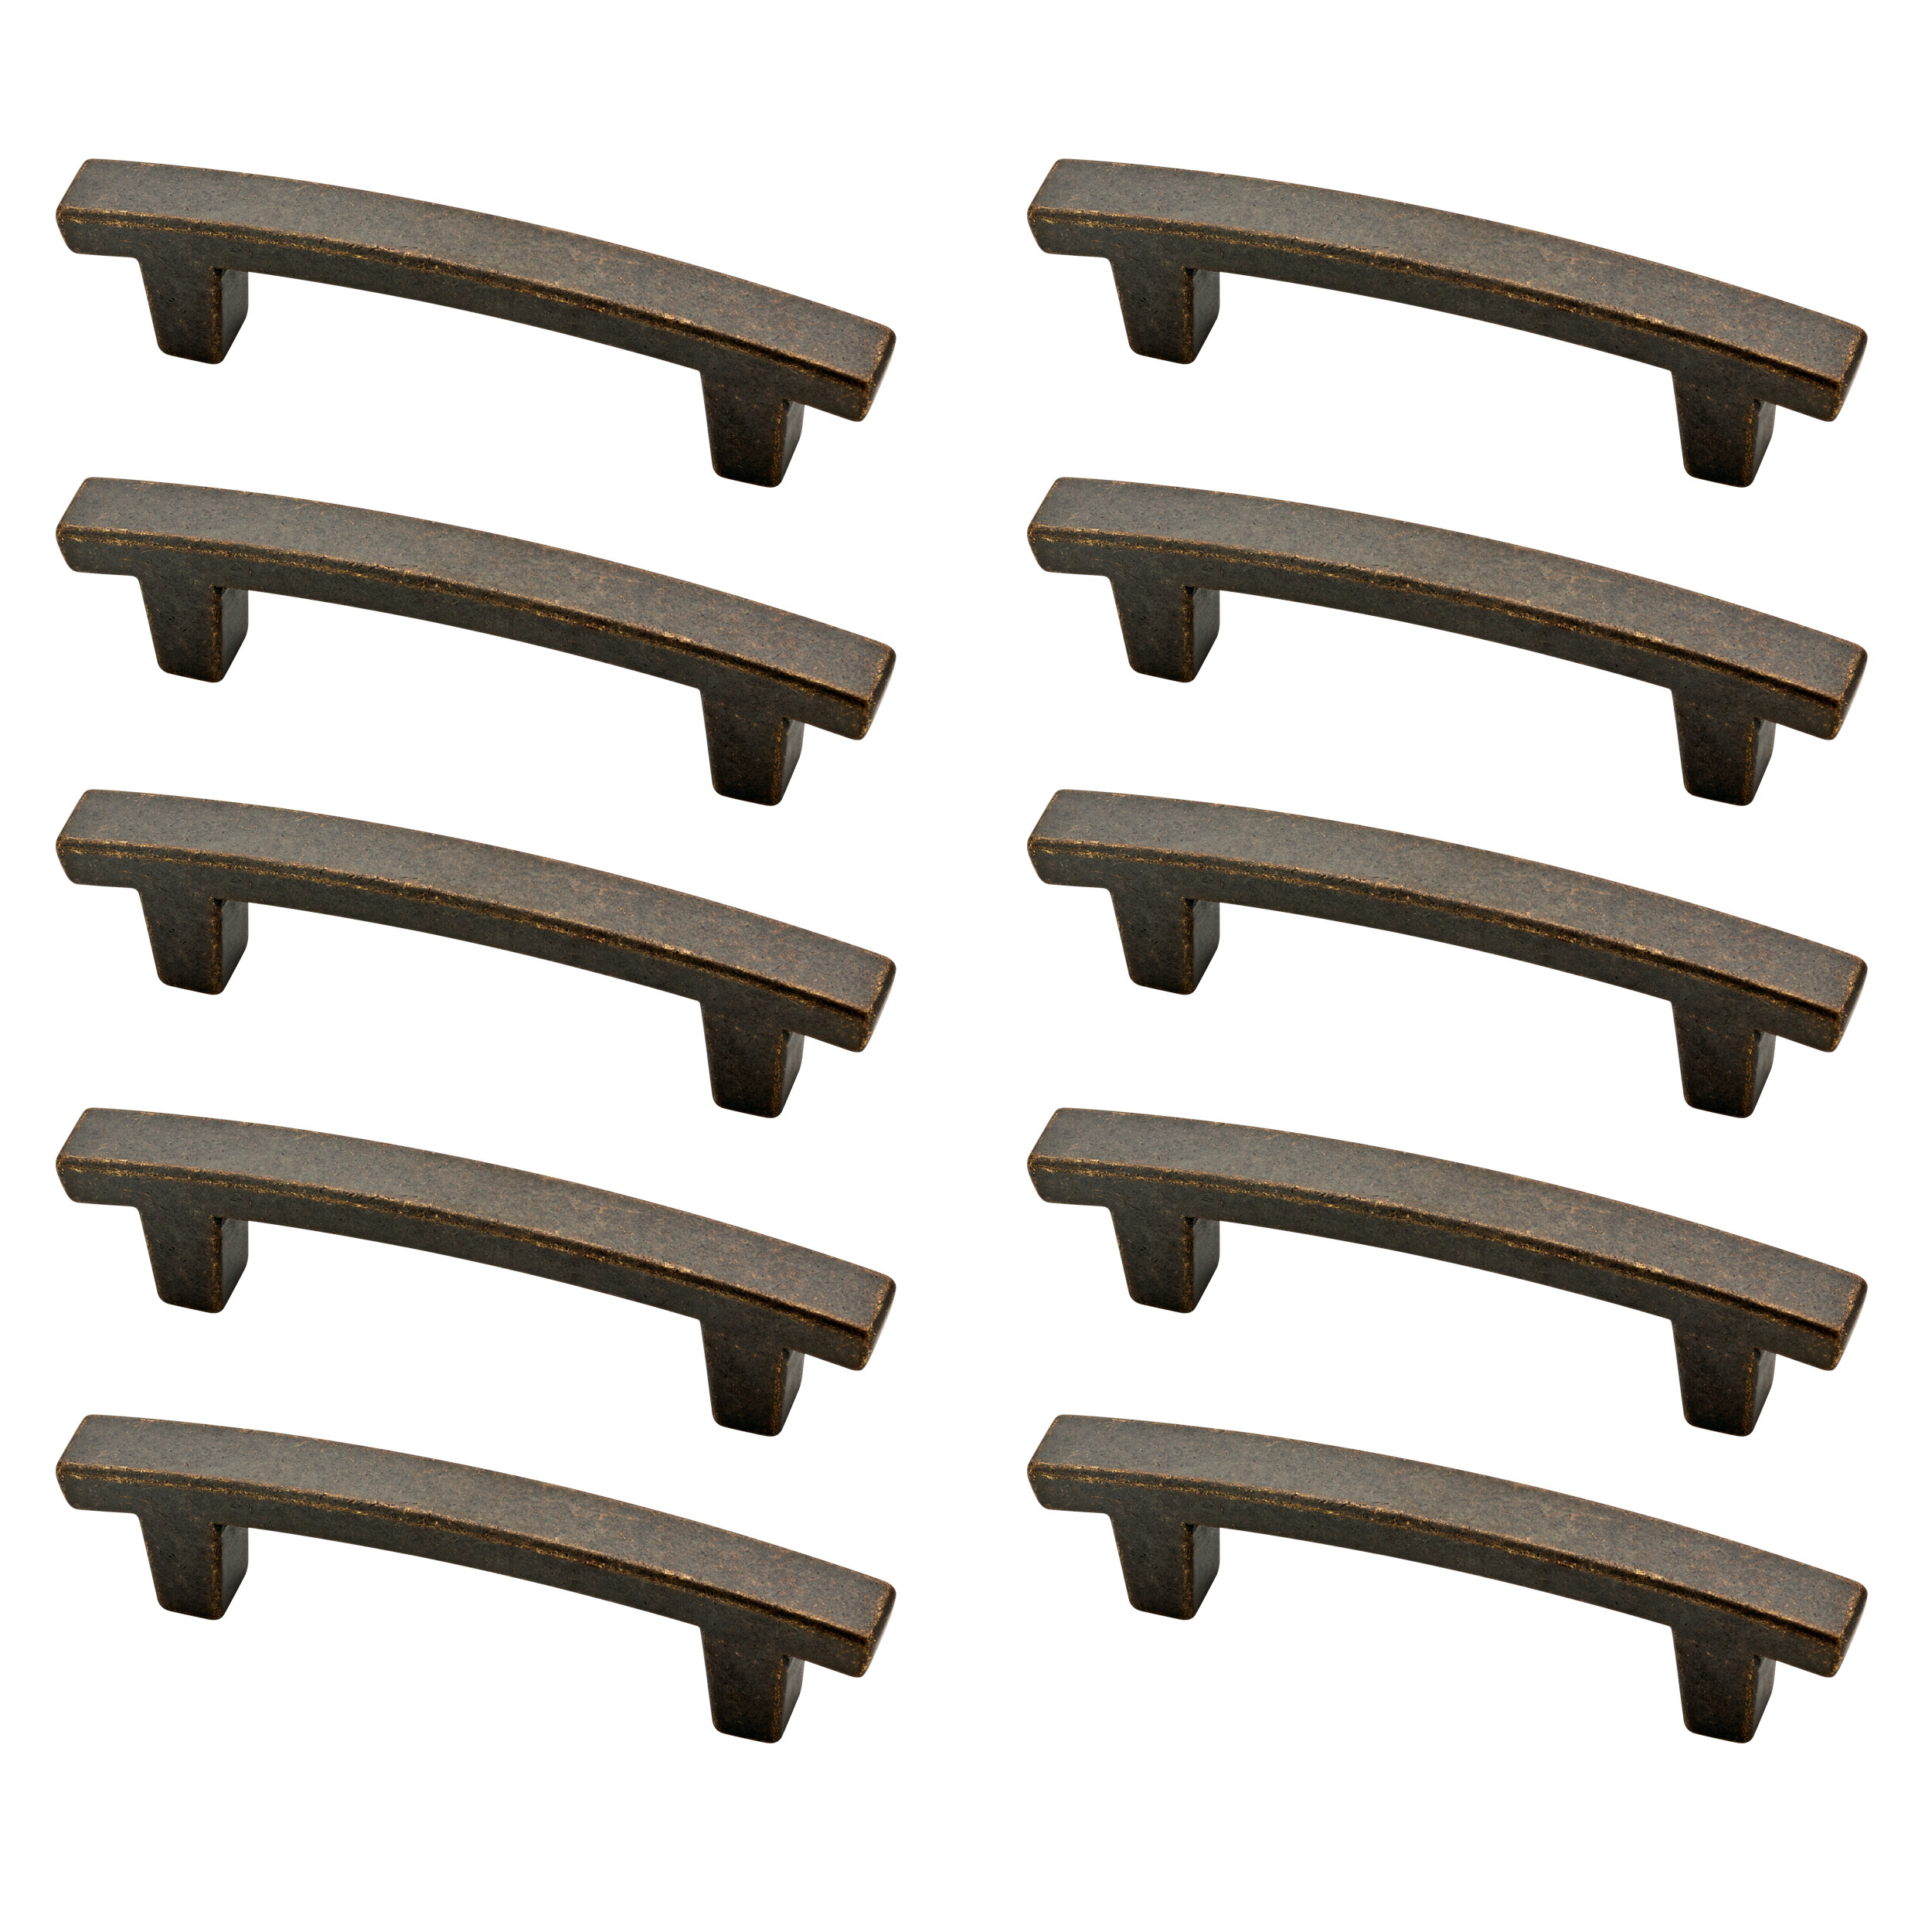 *25 Pack* Cosmas Cabinet Hardware Oil Rubbed Bronze Arch Handle Pull #616-030ORB 